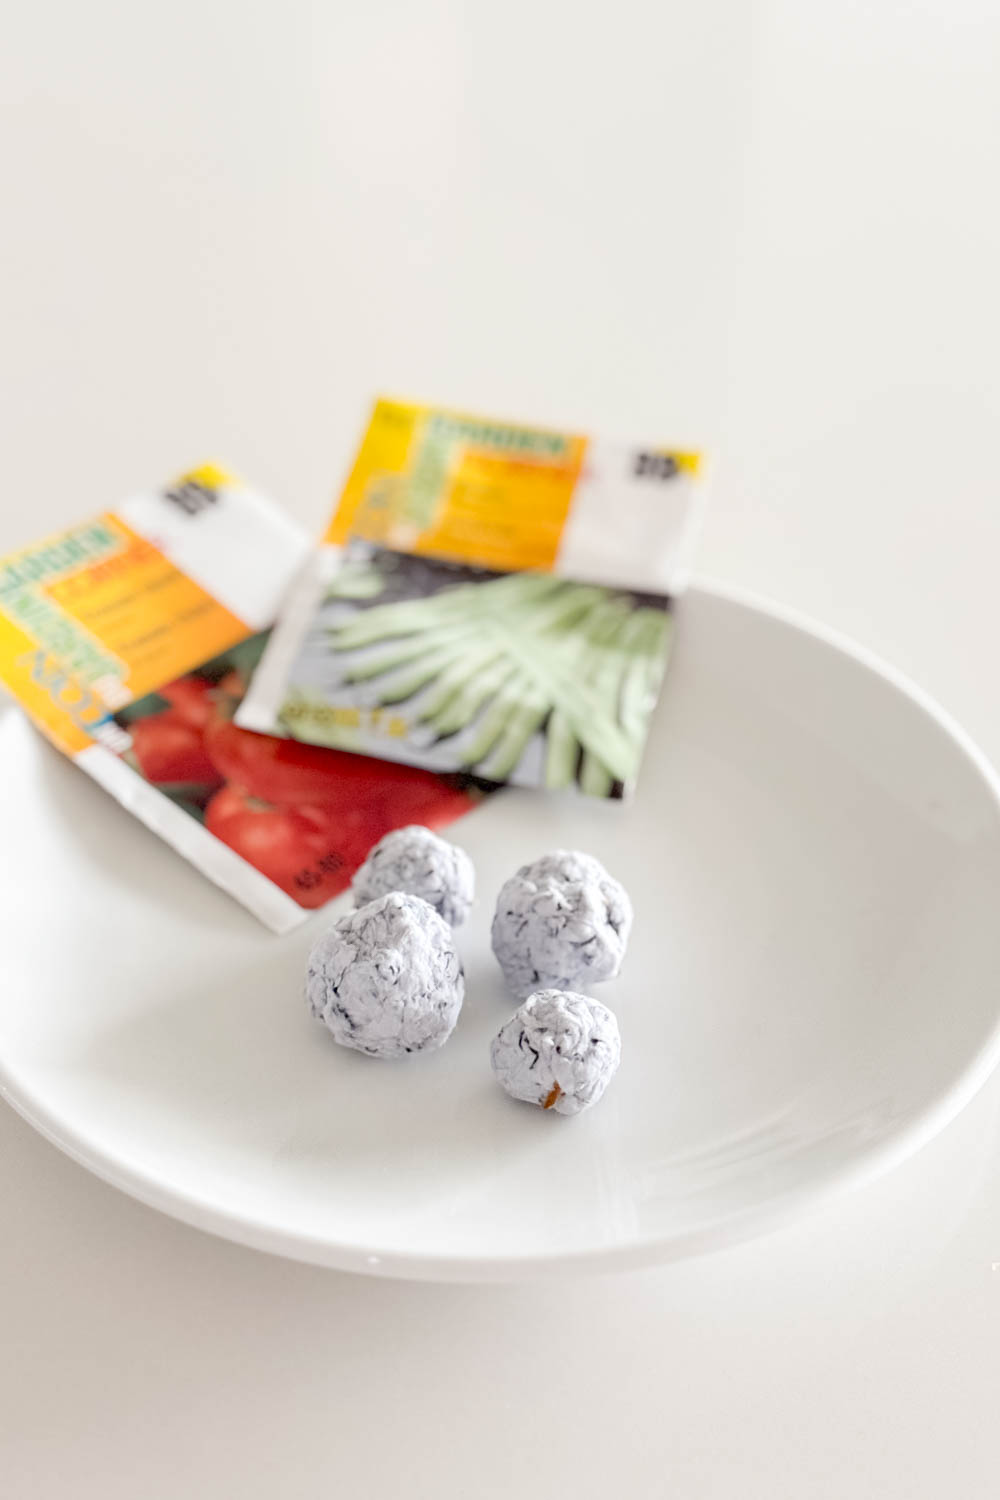 Seed bombs sitting on a white plate with additional seed packets in the background